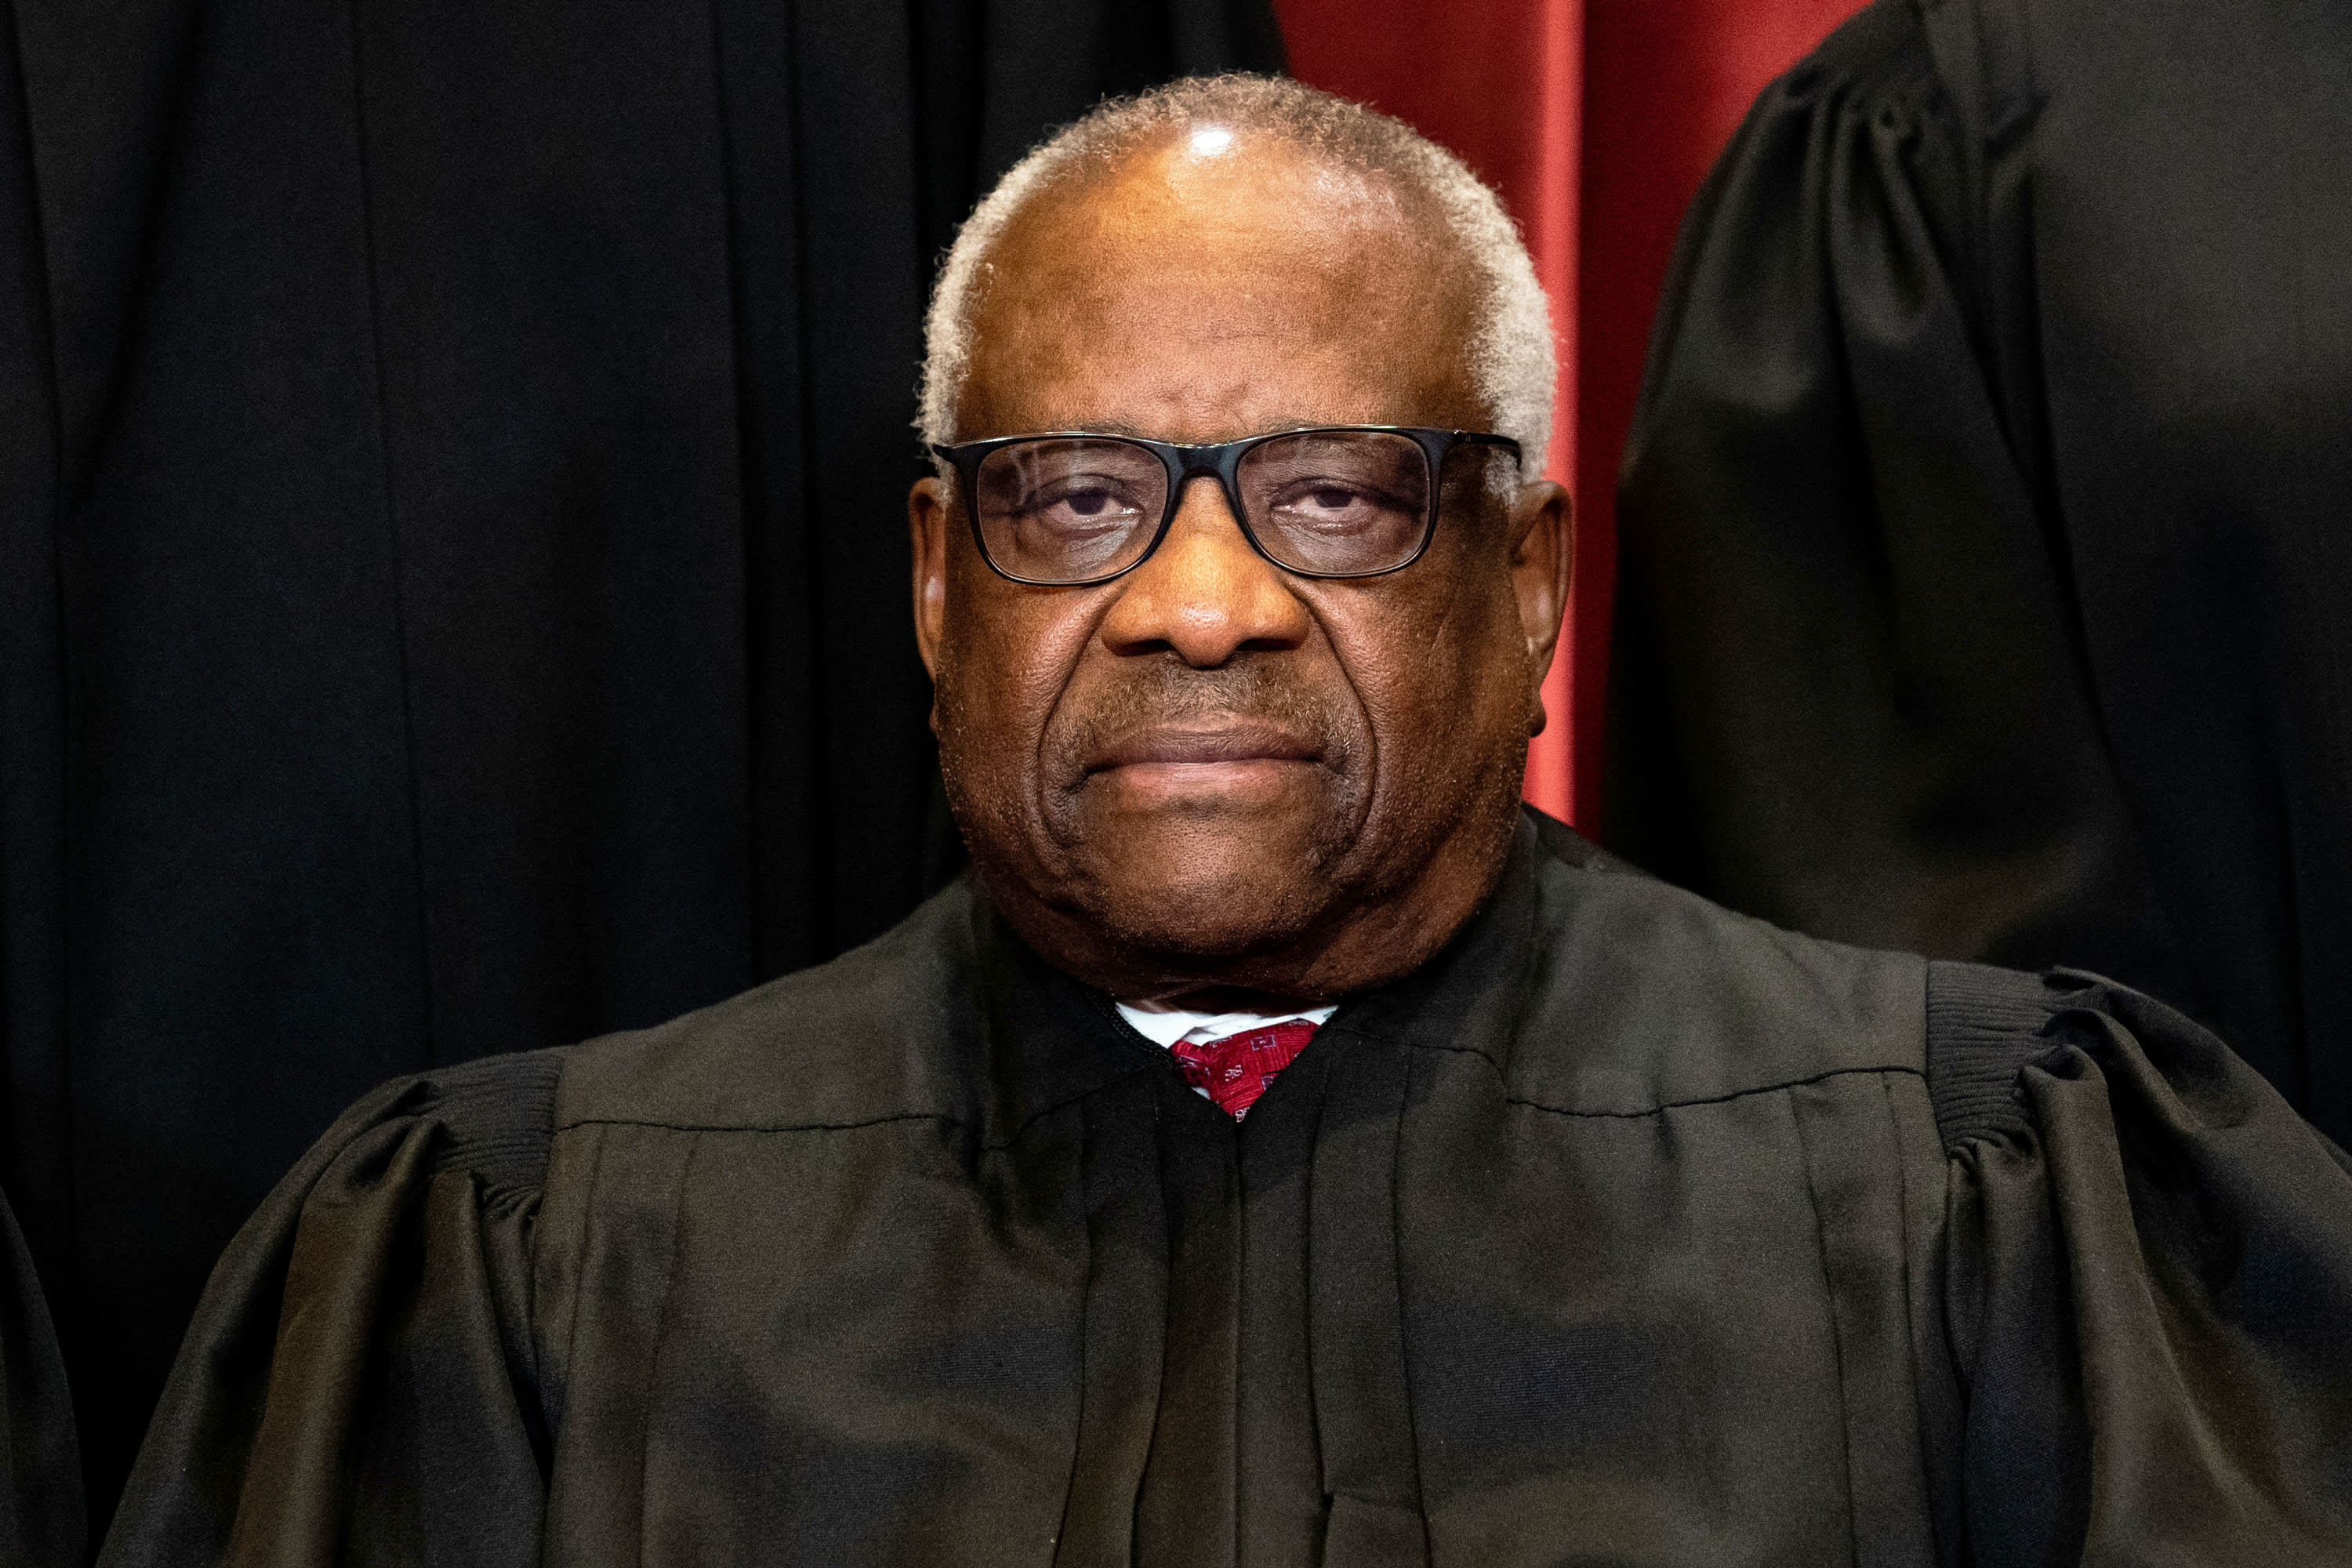 Senate Democrats ask billionaire Harlan Crow to list gifts to Clarence Thomas and any other justices